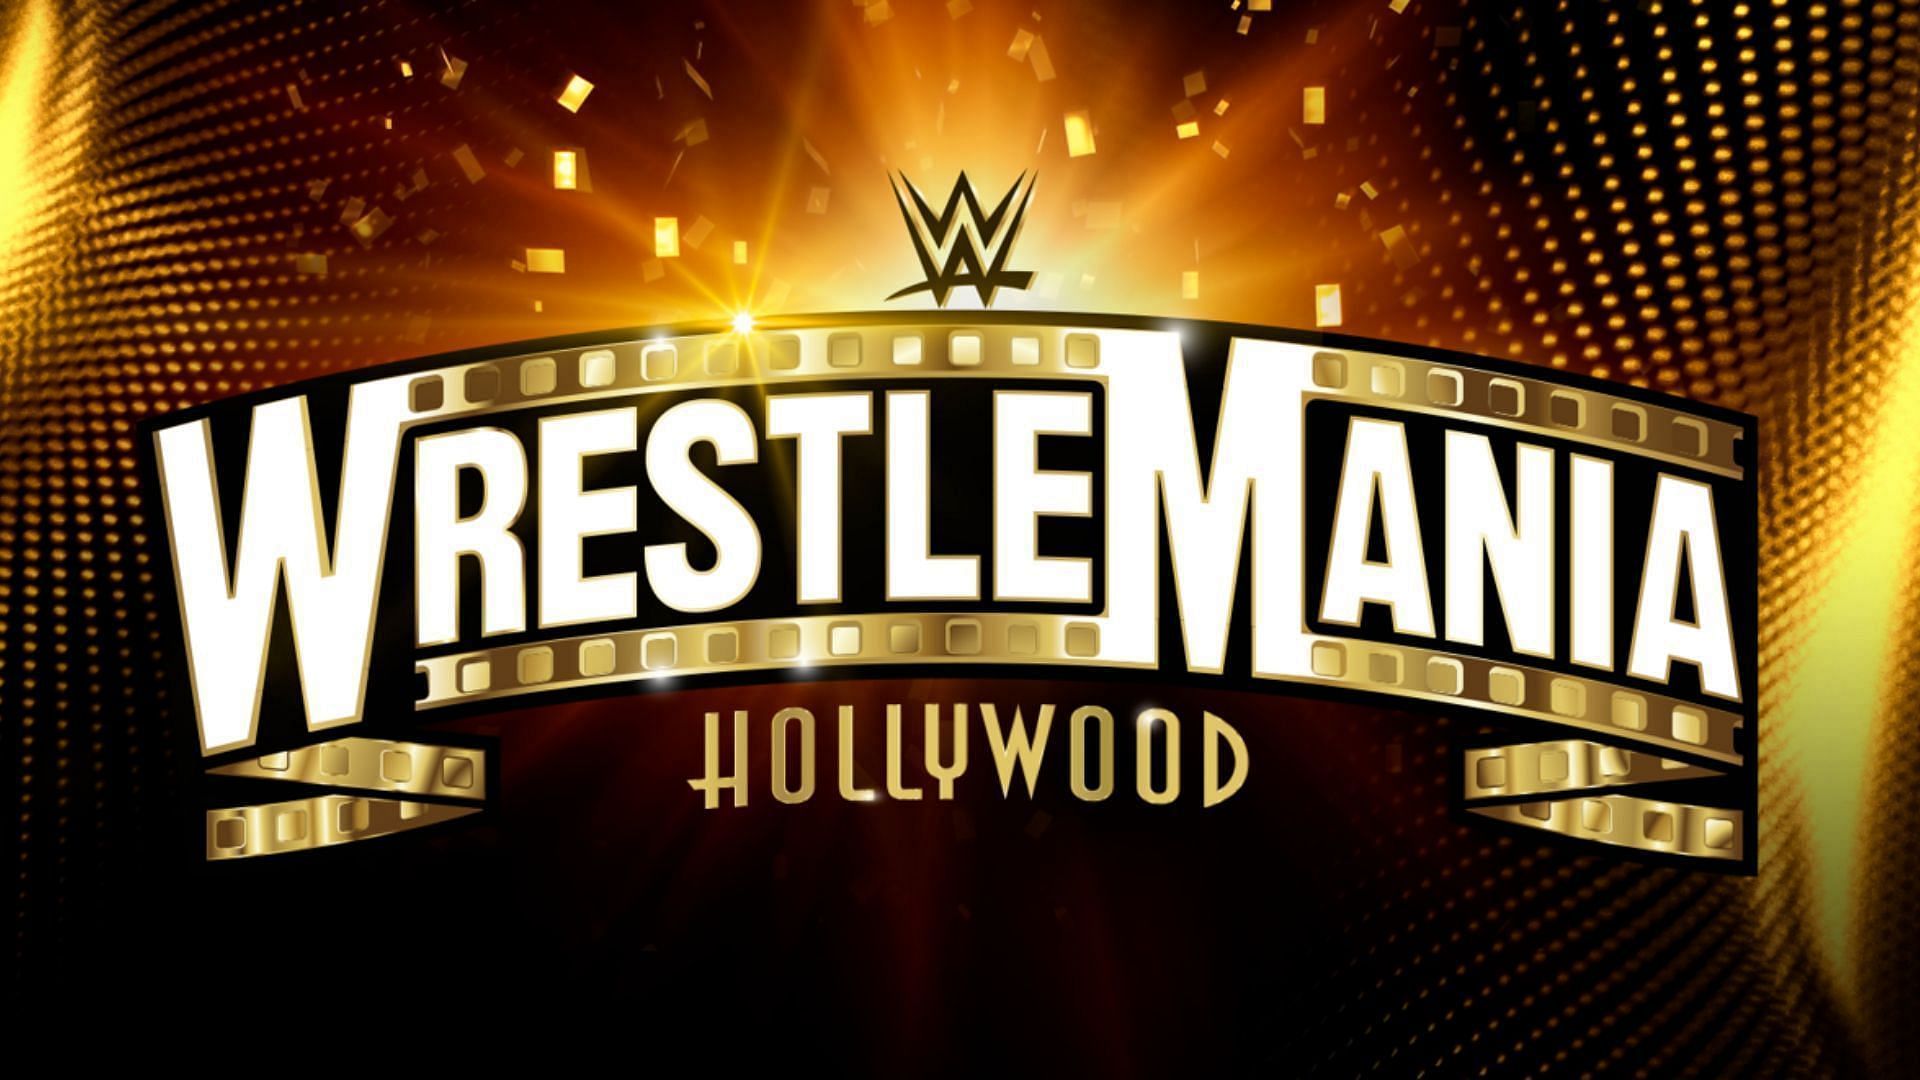 WrestleMania 39 was held on April 1 and 2 at the SoFi Stadium in Los Angeles.